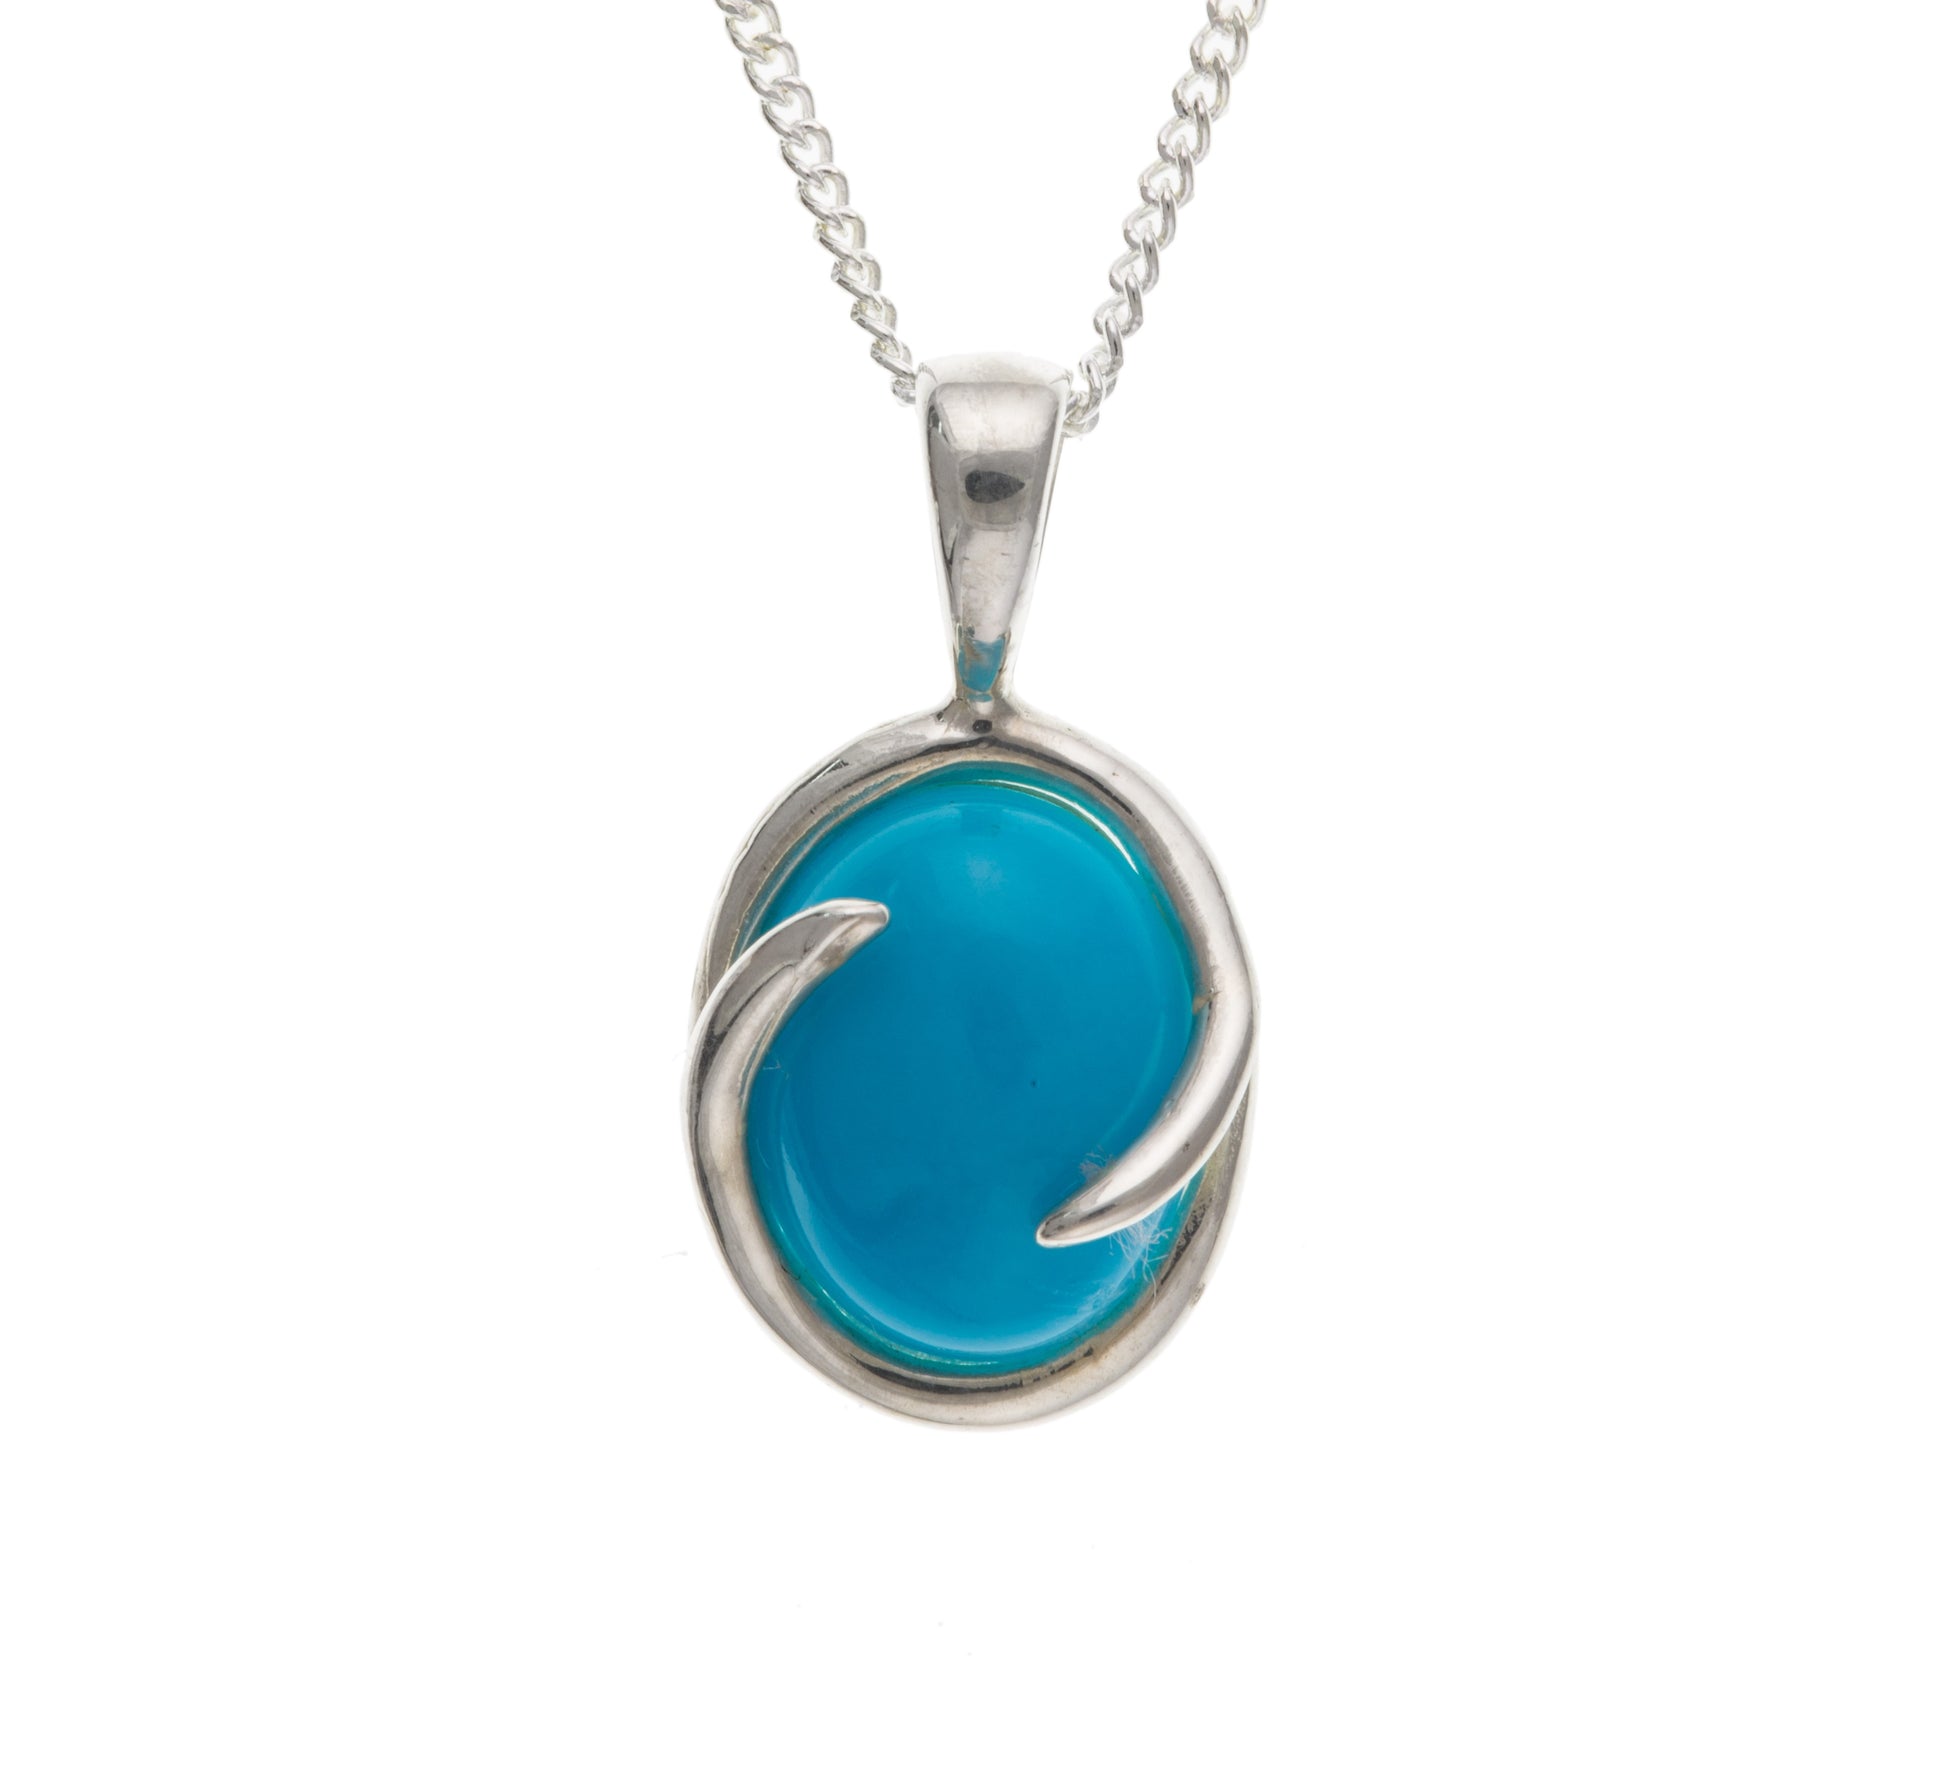 Oval turquoise sterling silver necklace pendant